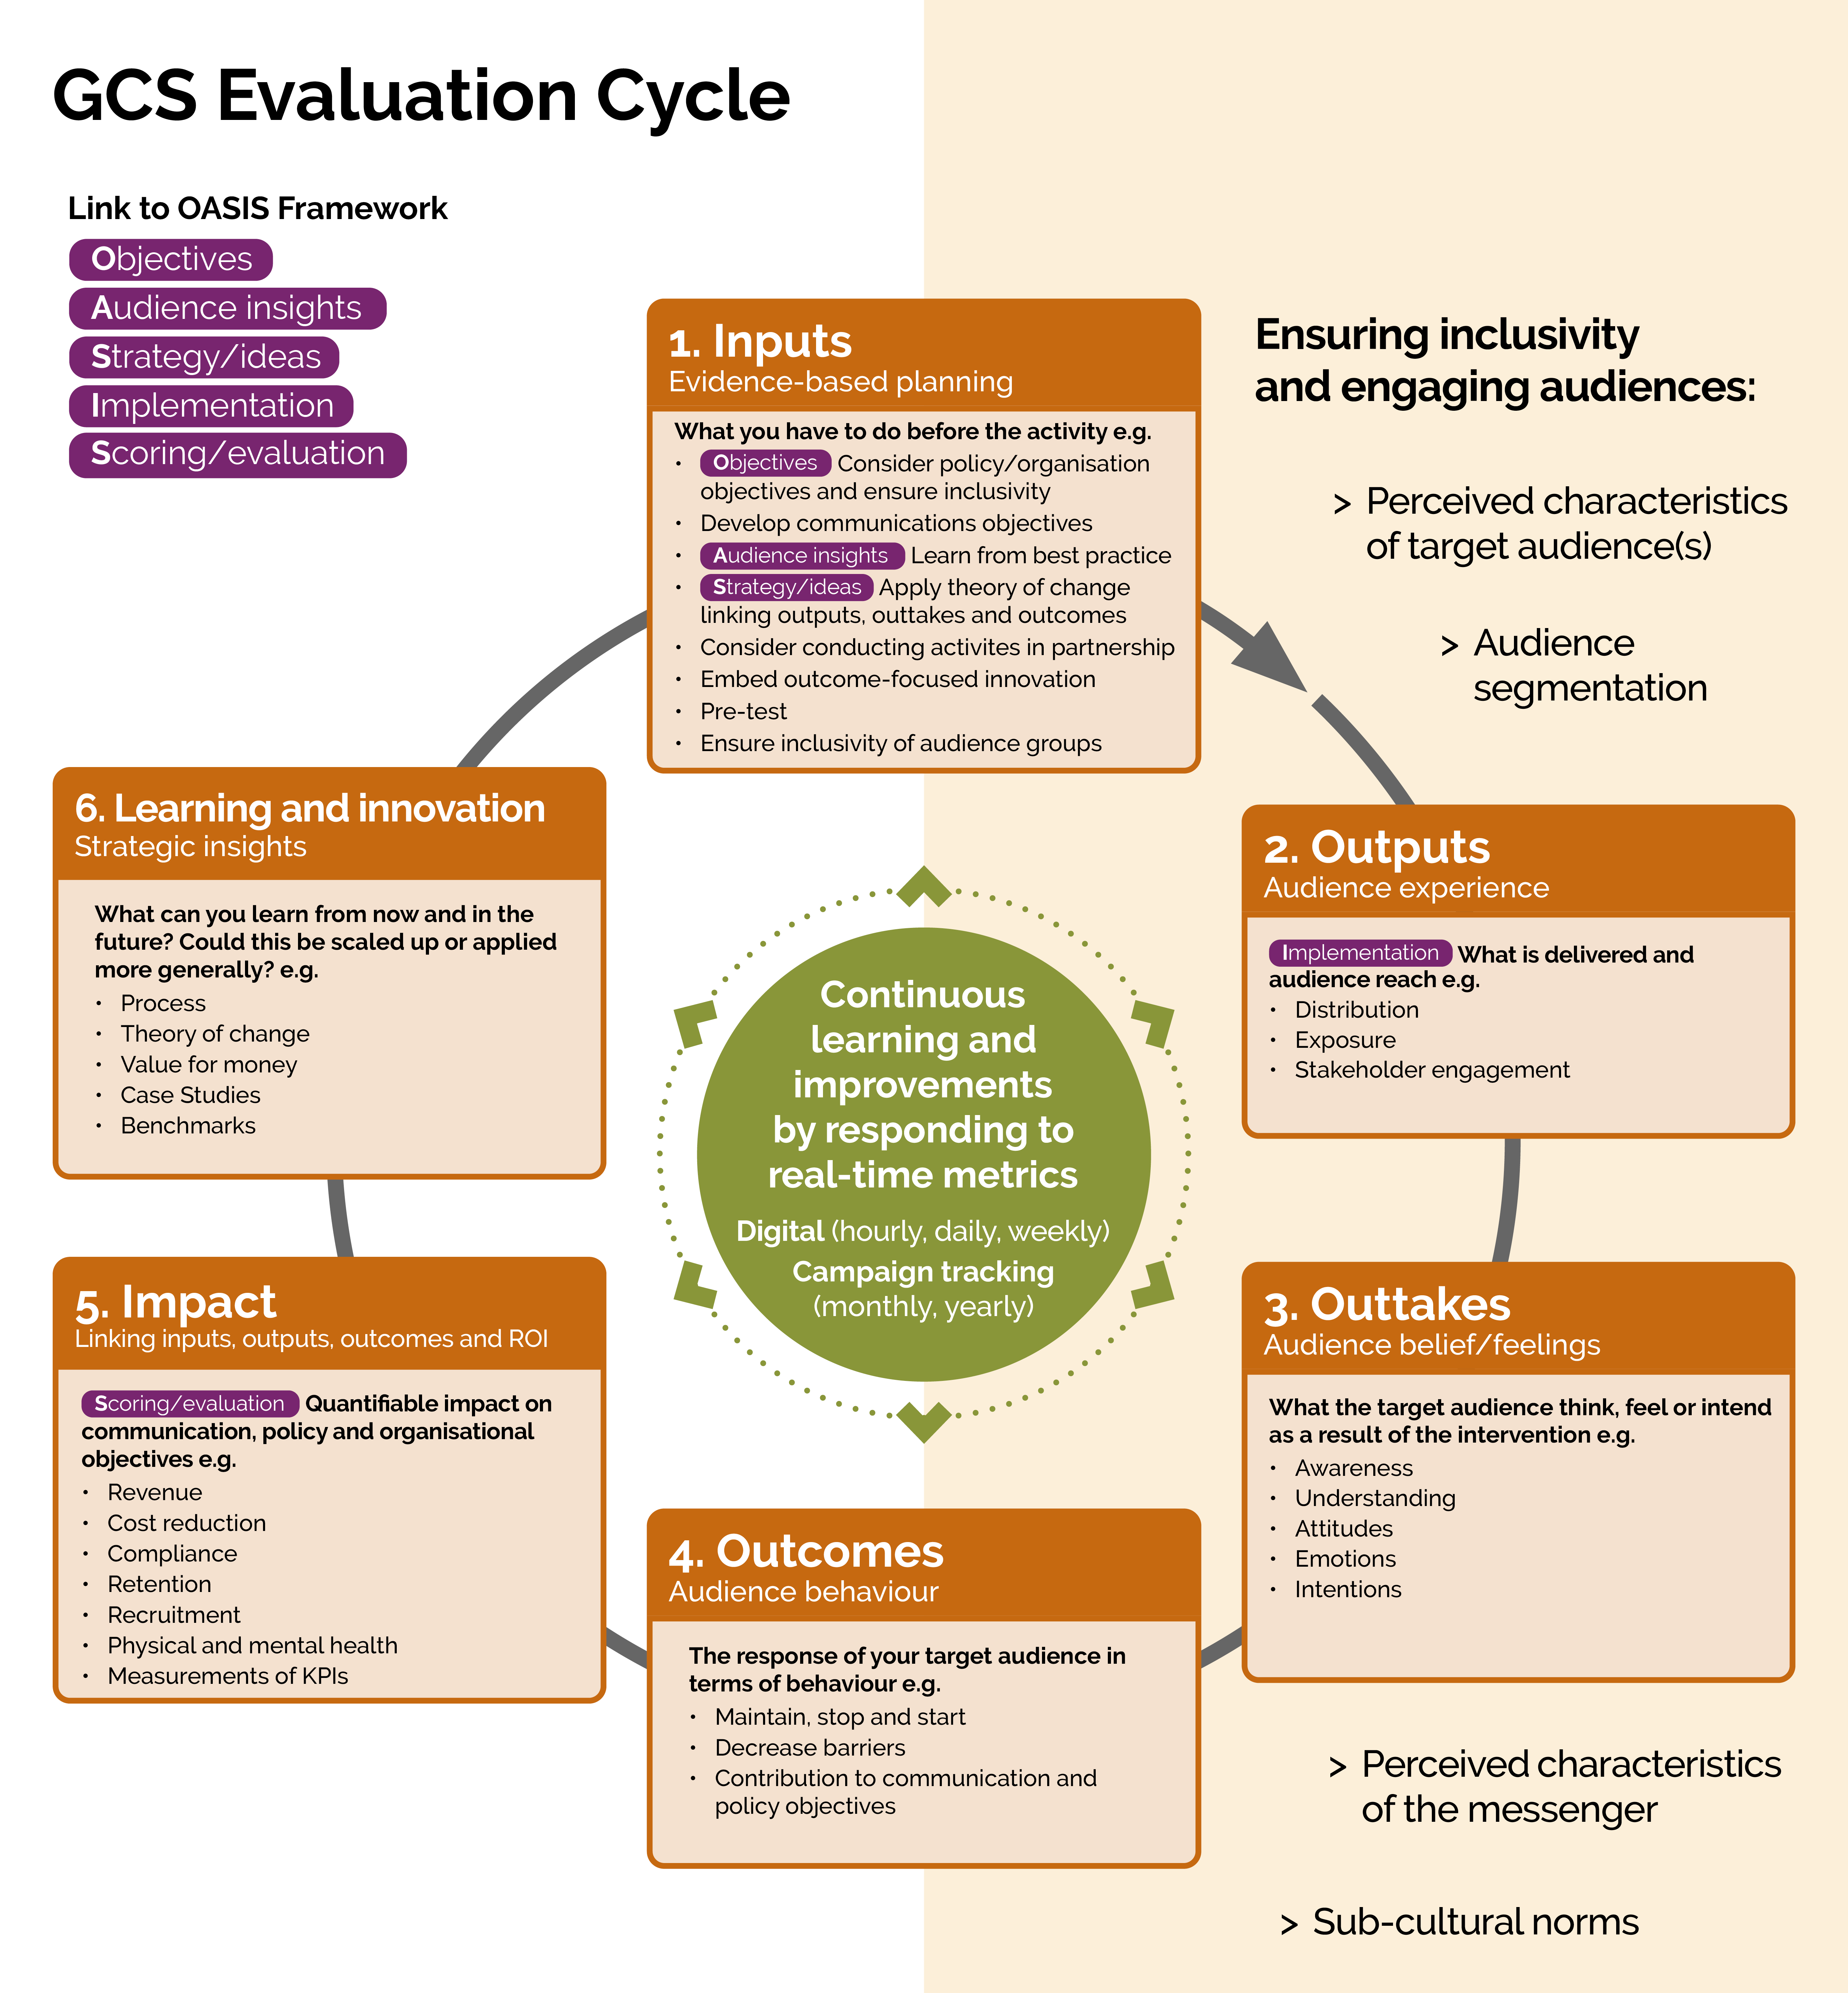 A diagram of the Evaluation Cycle, which shows a cyclical process with 6 steps (Inputs, Outputs, Outtakes, Outcomes, Impact, and Learning and Innovation); the core of Continuous Learning and Improvements in the middle; linkages of OASIS elements to Inputs, Outputs, and Impact stages; and considerations for audience inclusivity when working on Inputs through to Outcomes.  